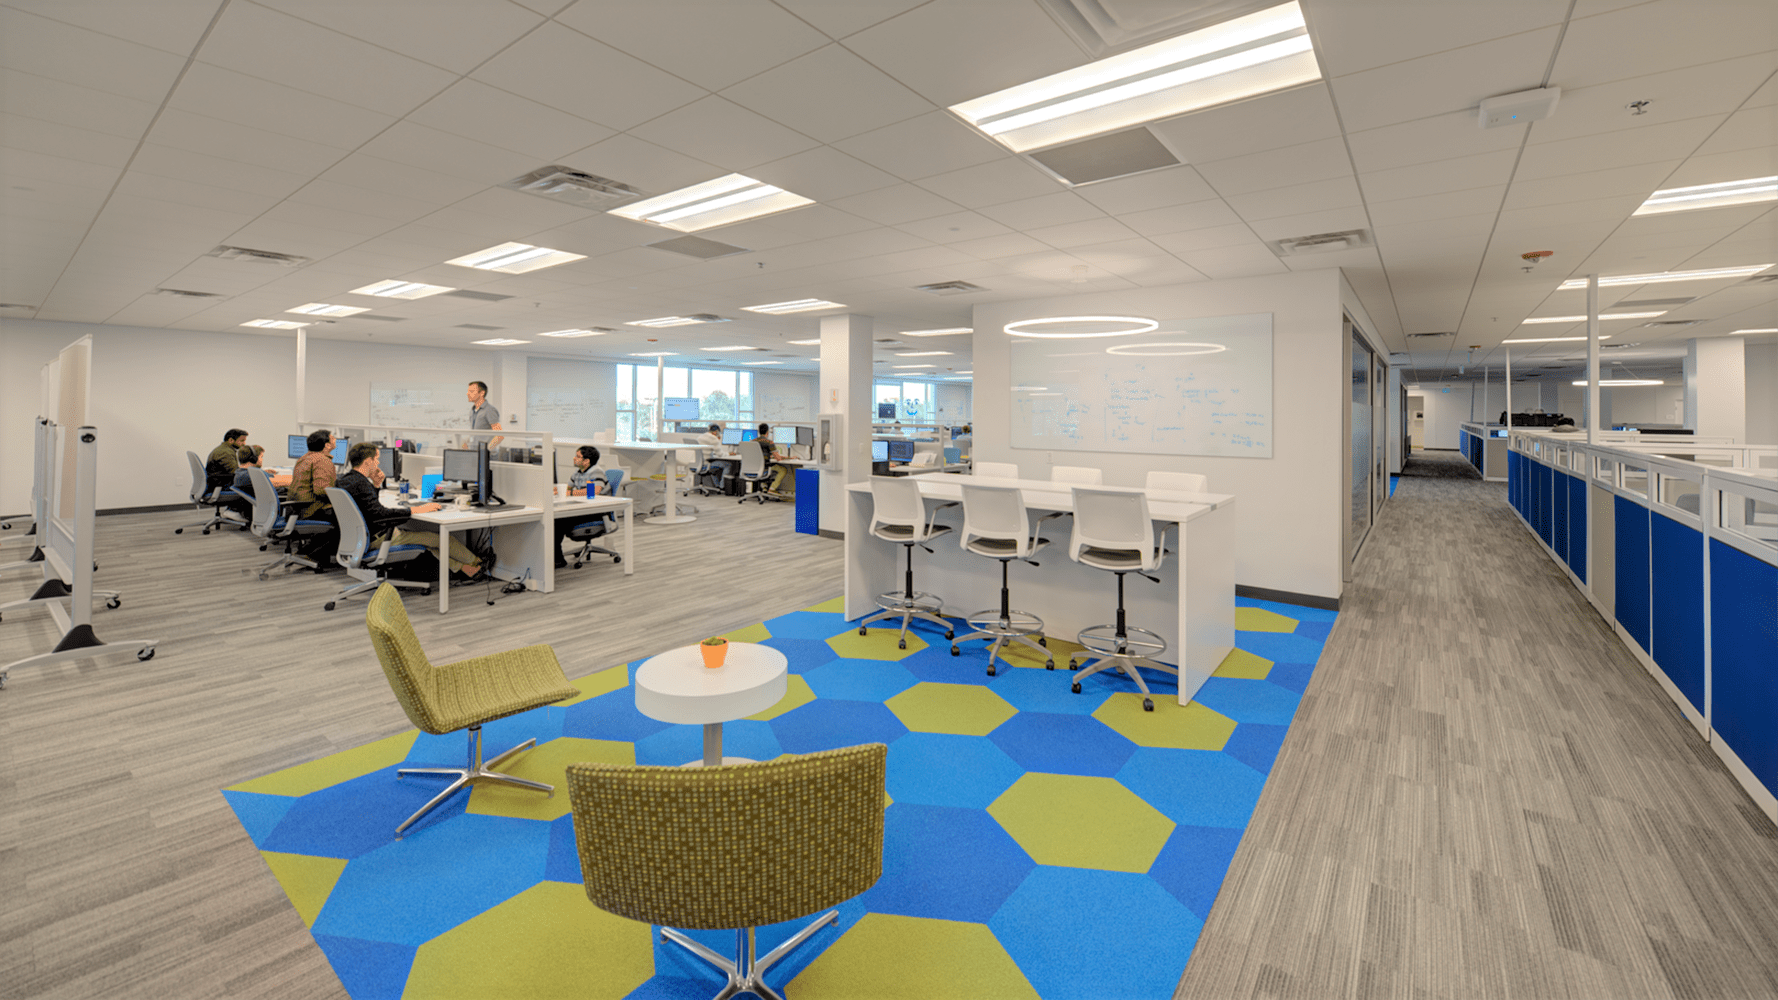 room with gray floors, blue cubicles, white chairs, and blue/yellow rug